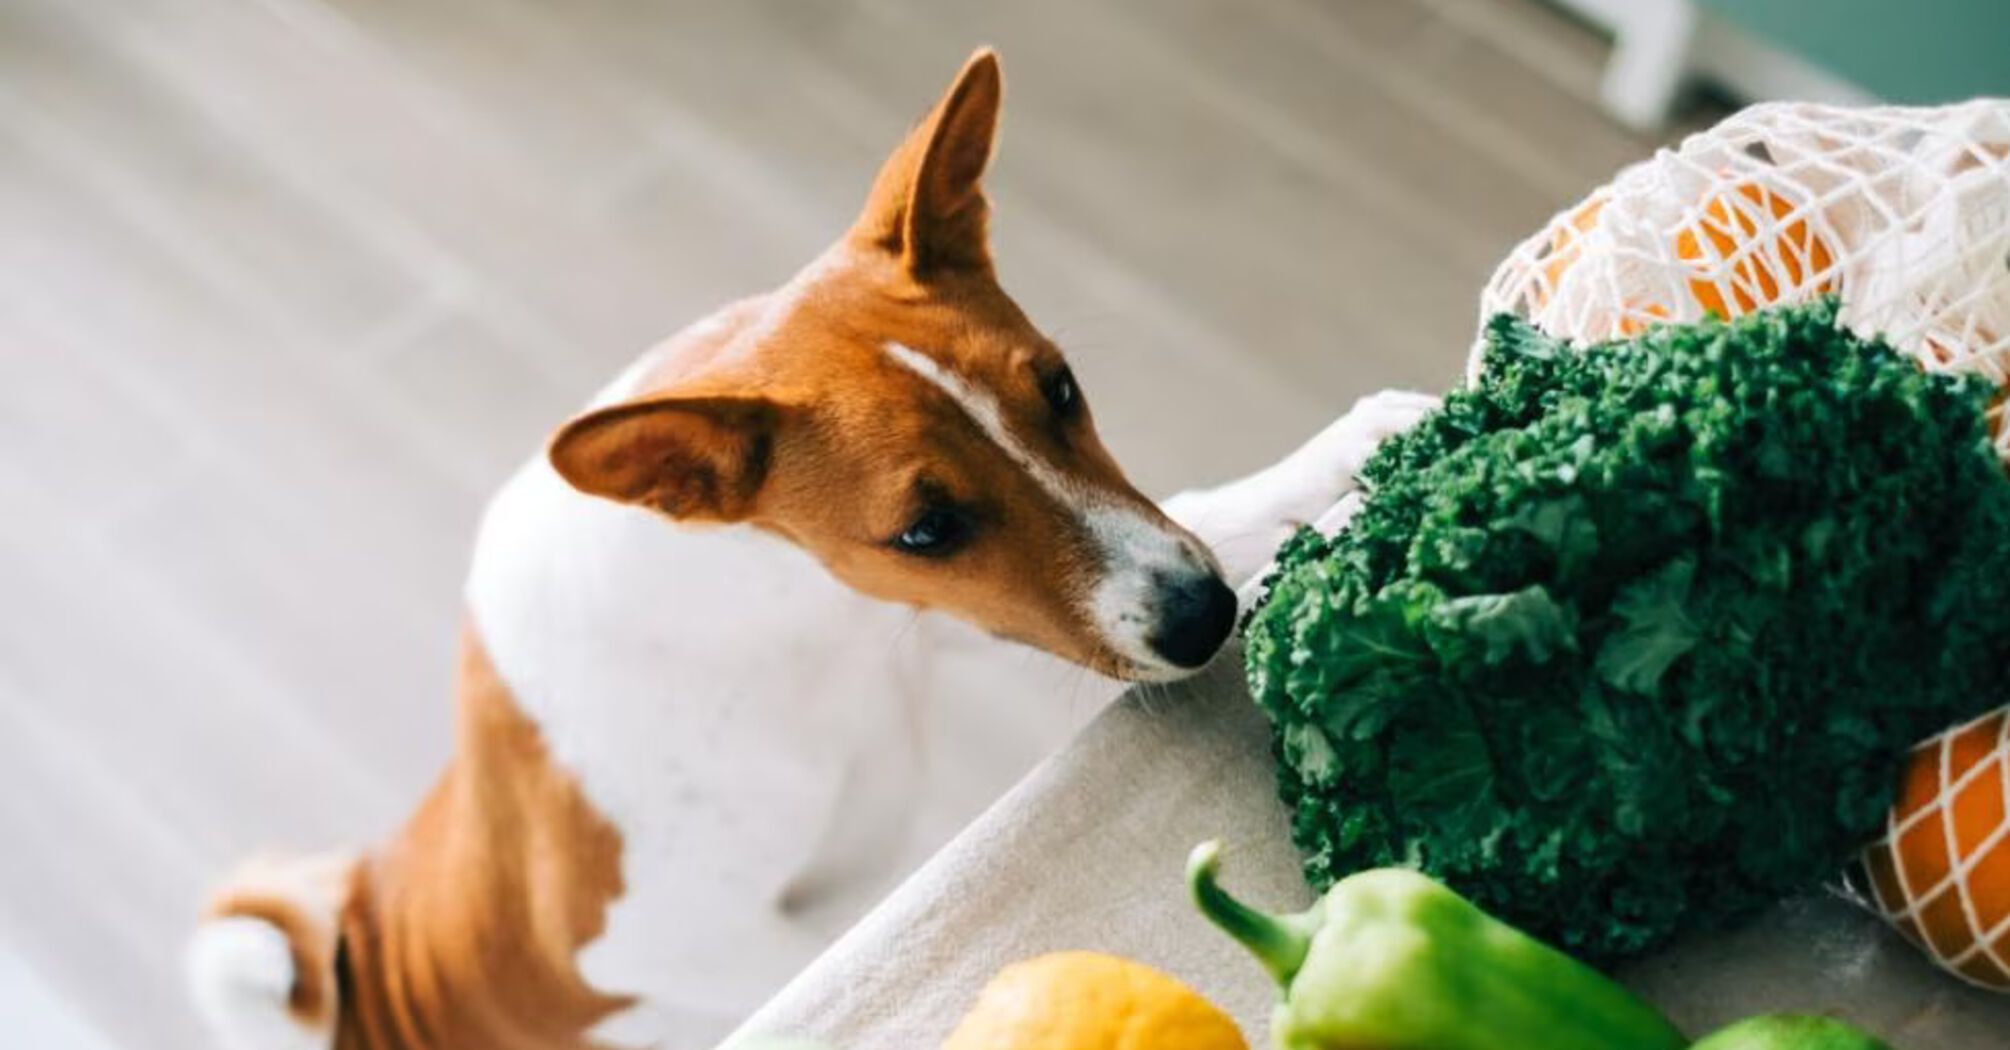 Safe and healthy vegetables for your dog's diet